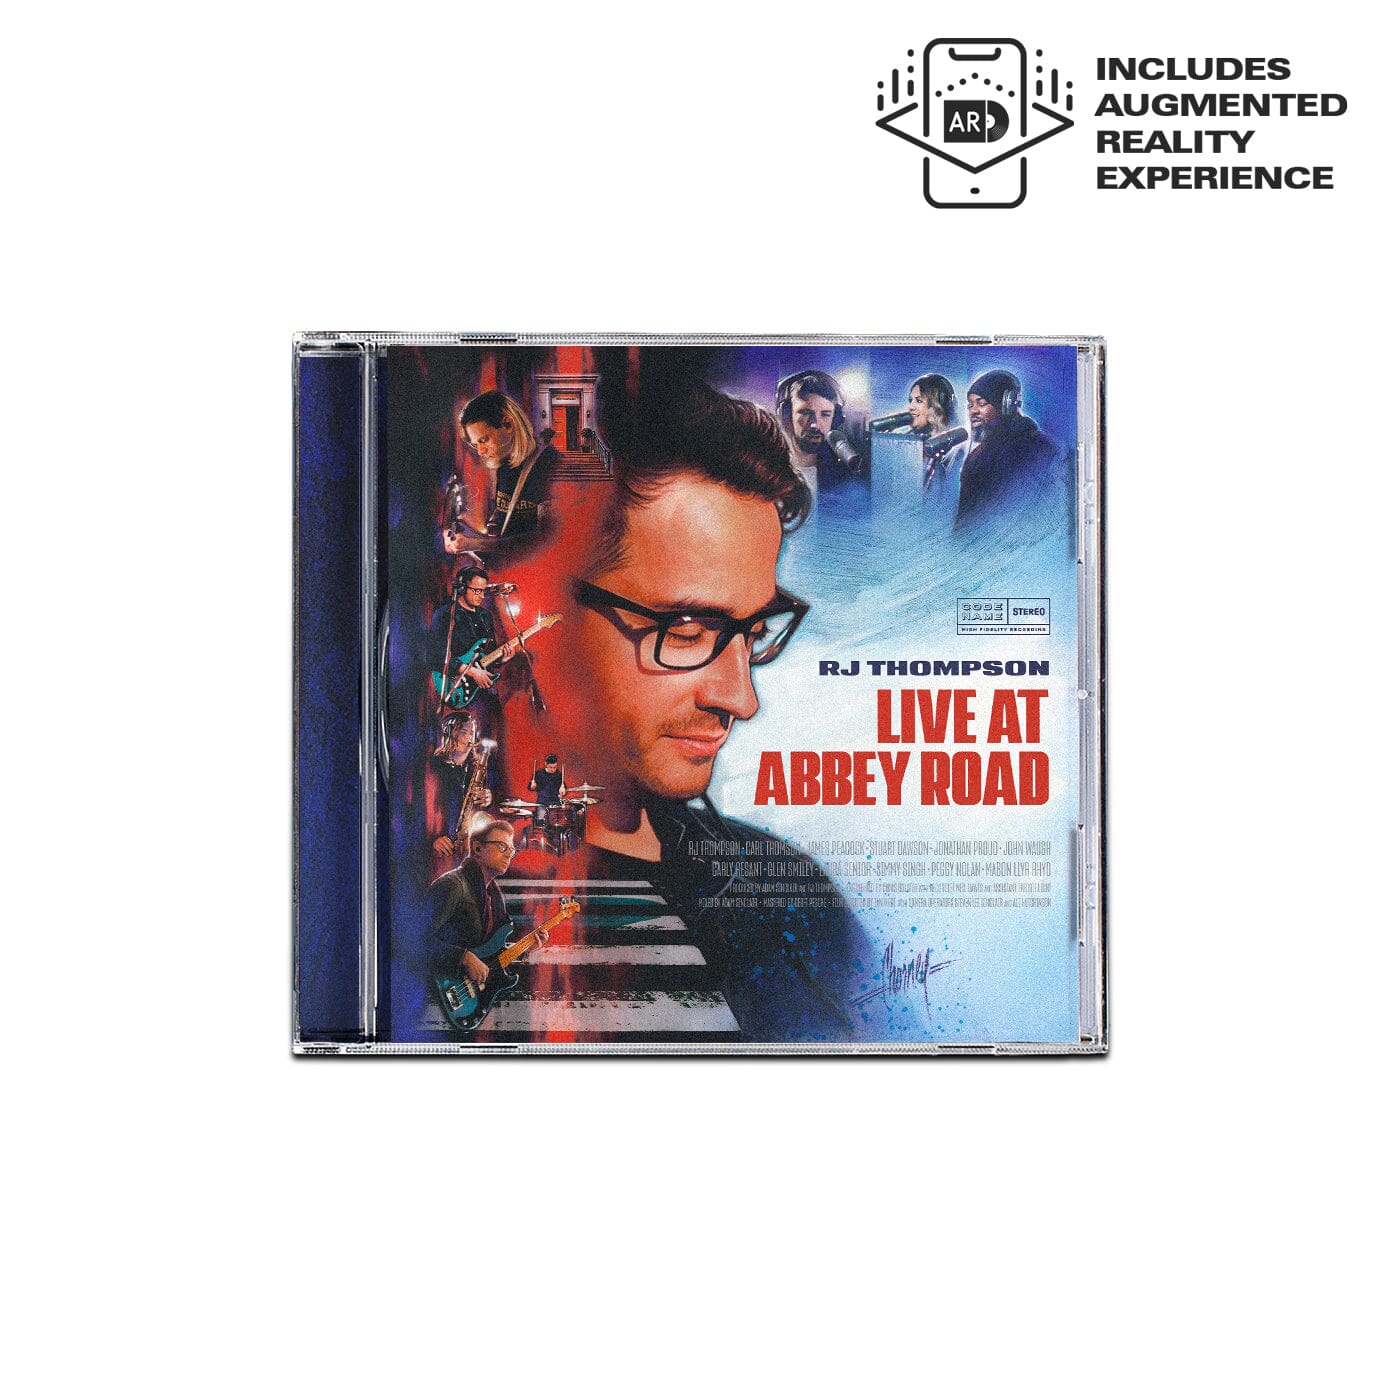 Live at Abbey Road - CD | RJ Thompson | Official Website & Store